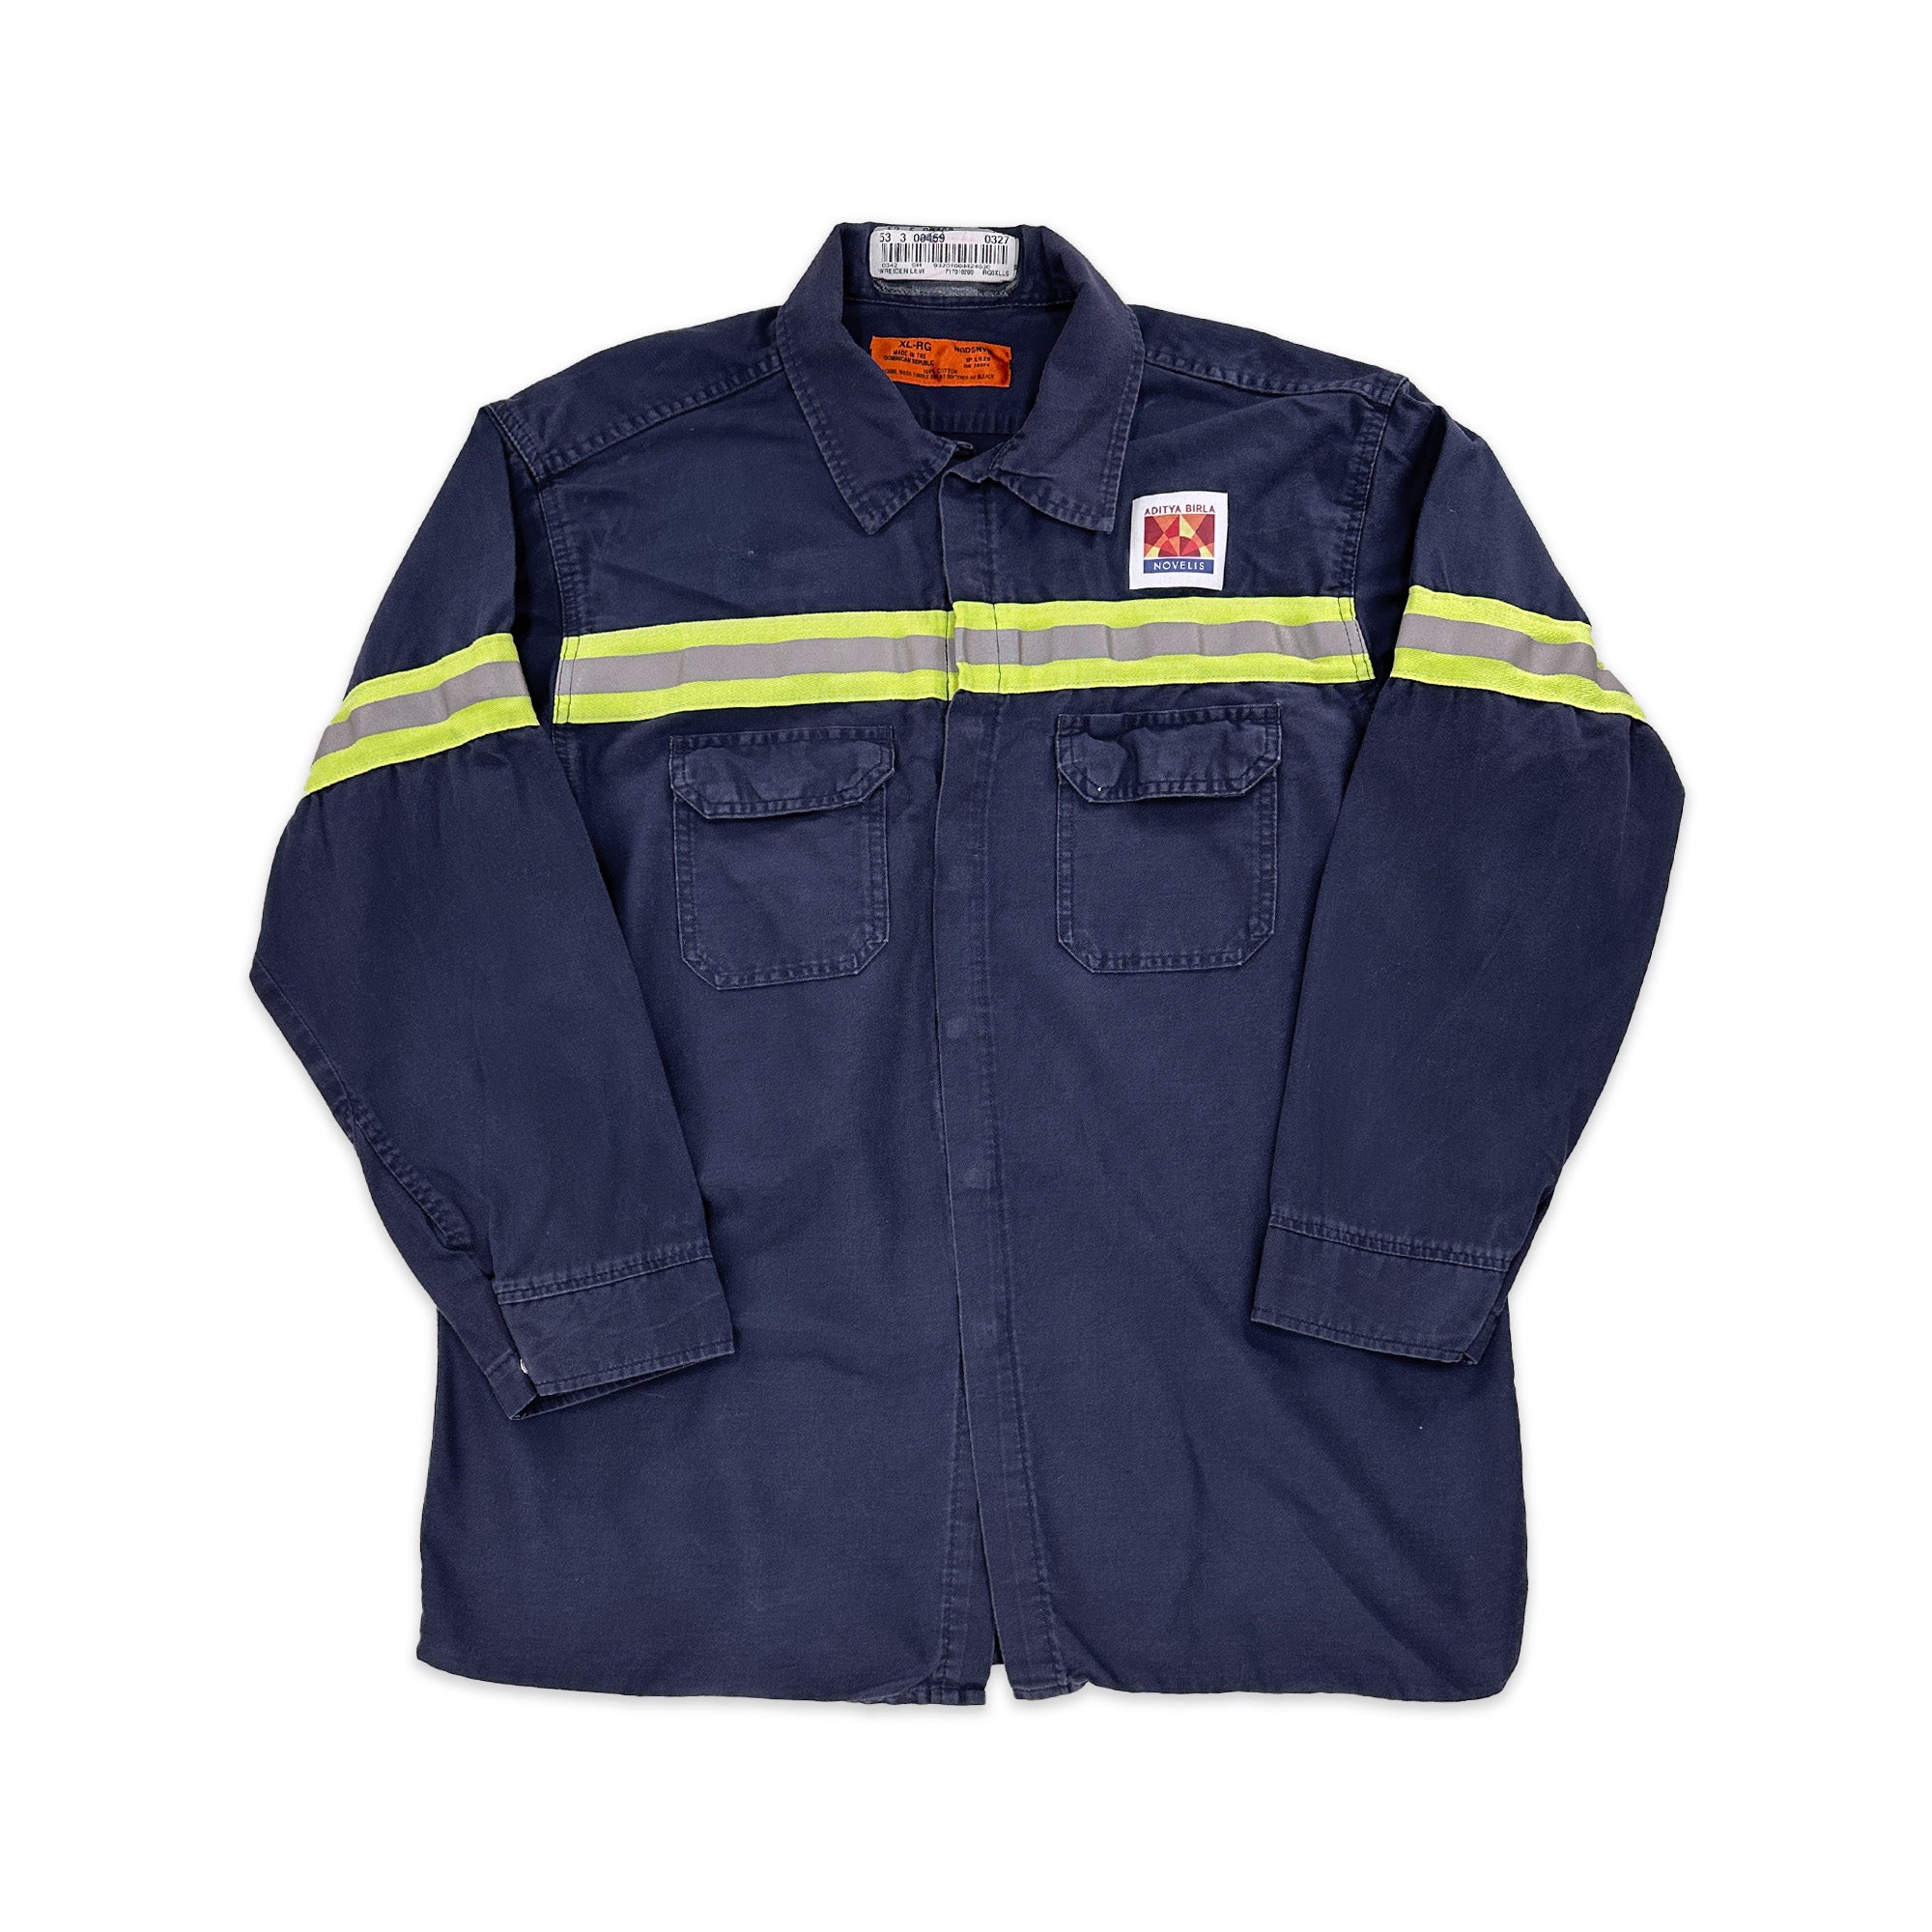 Long Sleeved Safety Work Shirt - XL Great Lakes Reclaimed Denim